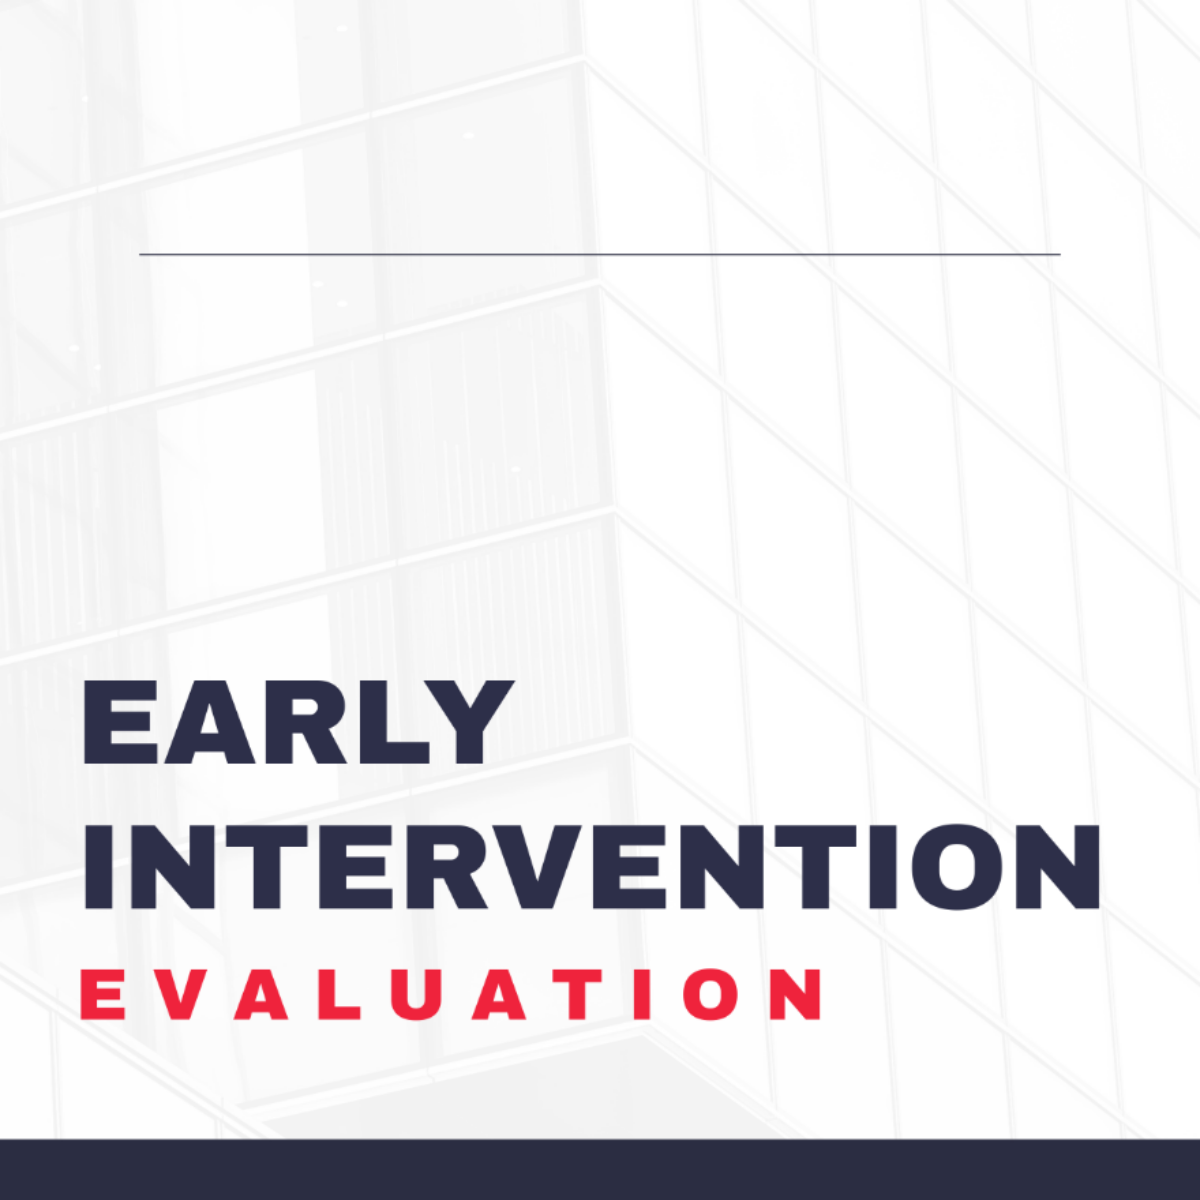 Early Intervention Evaluation Template